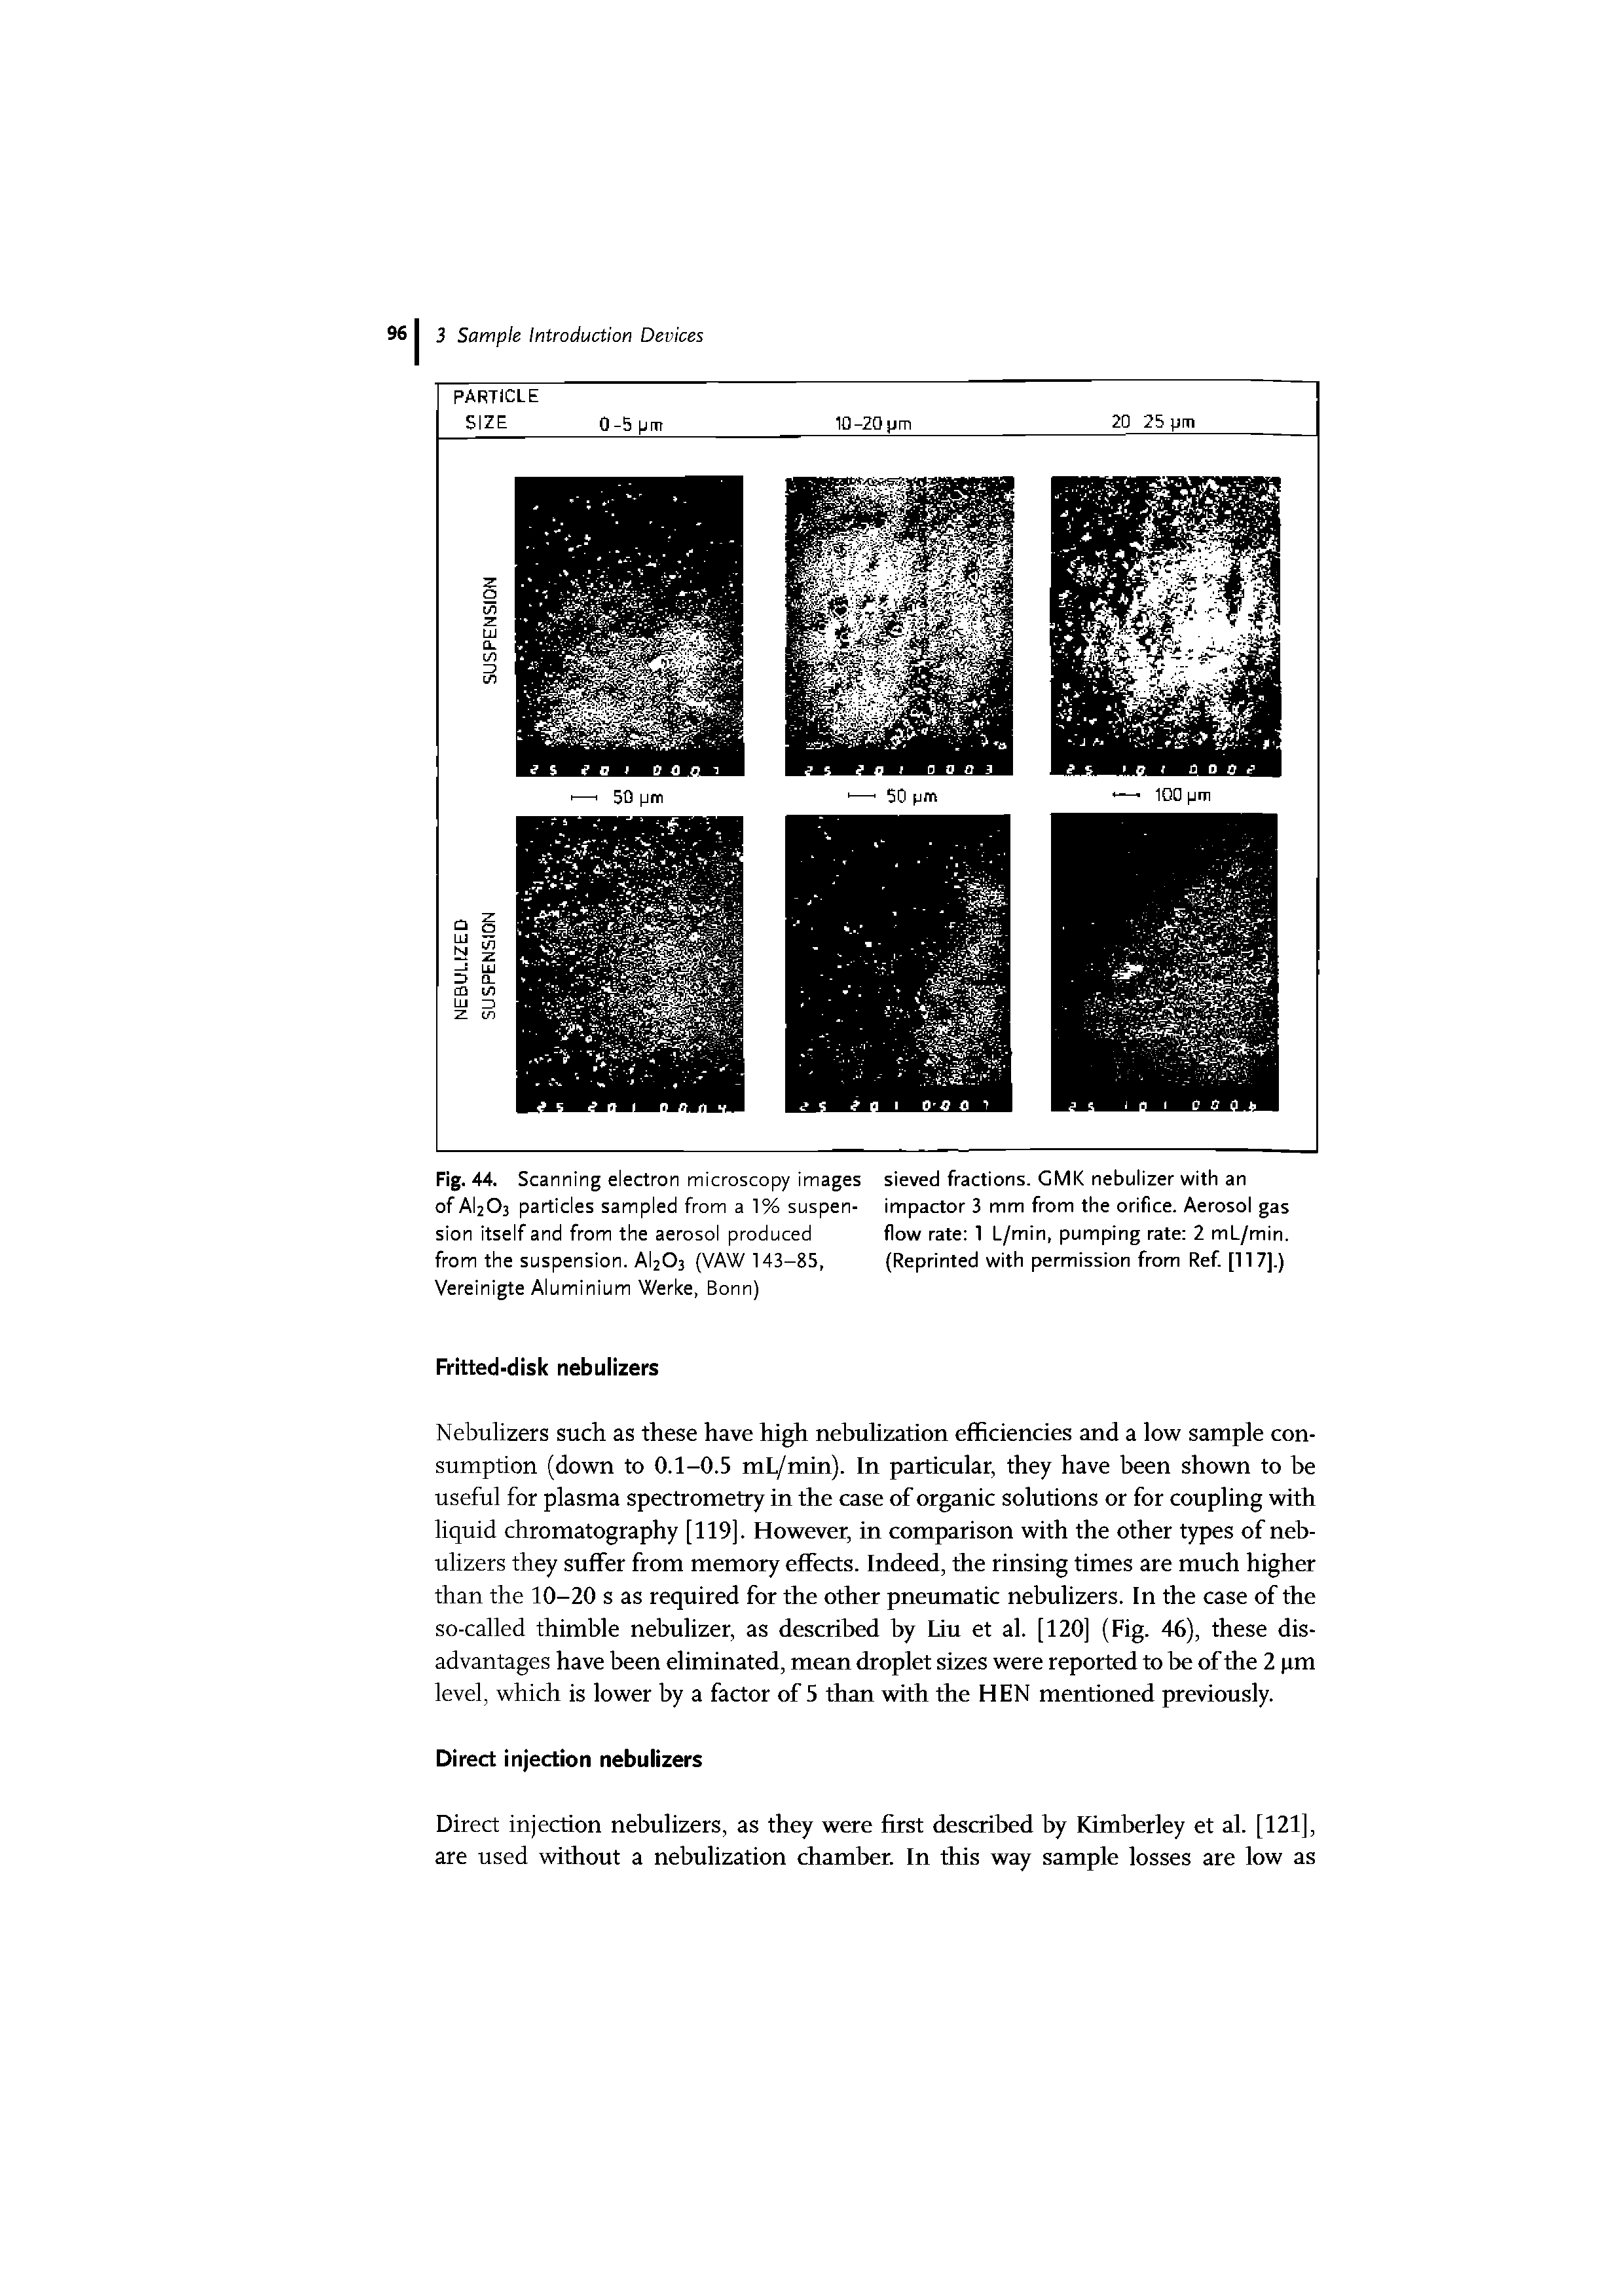 Fig. 44. Scanning electron microscopy images sieved fractions. GMK nebulizer with an of AI2O3 particles sampled from a 1% suspen- impactor 3 mm from the orifice. Aerosol gas sion itself and from the aerosol produced flow rate 1 L/min, pumping rate 2 mL/min.